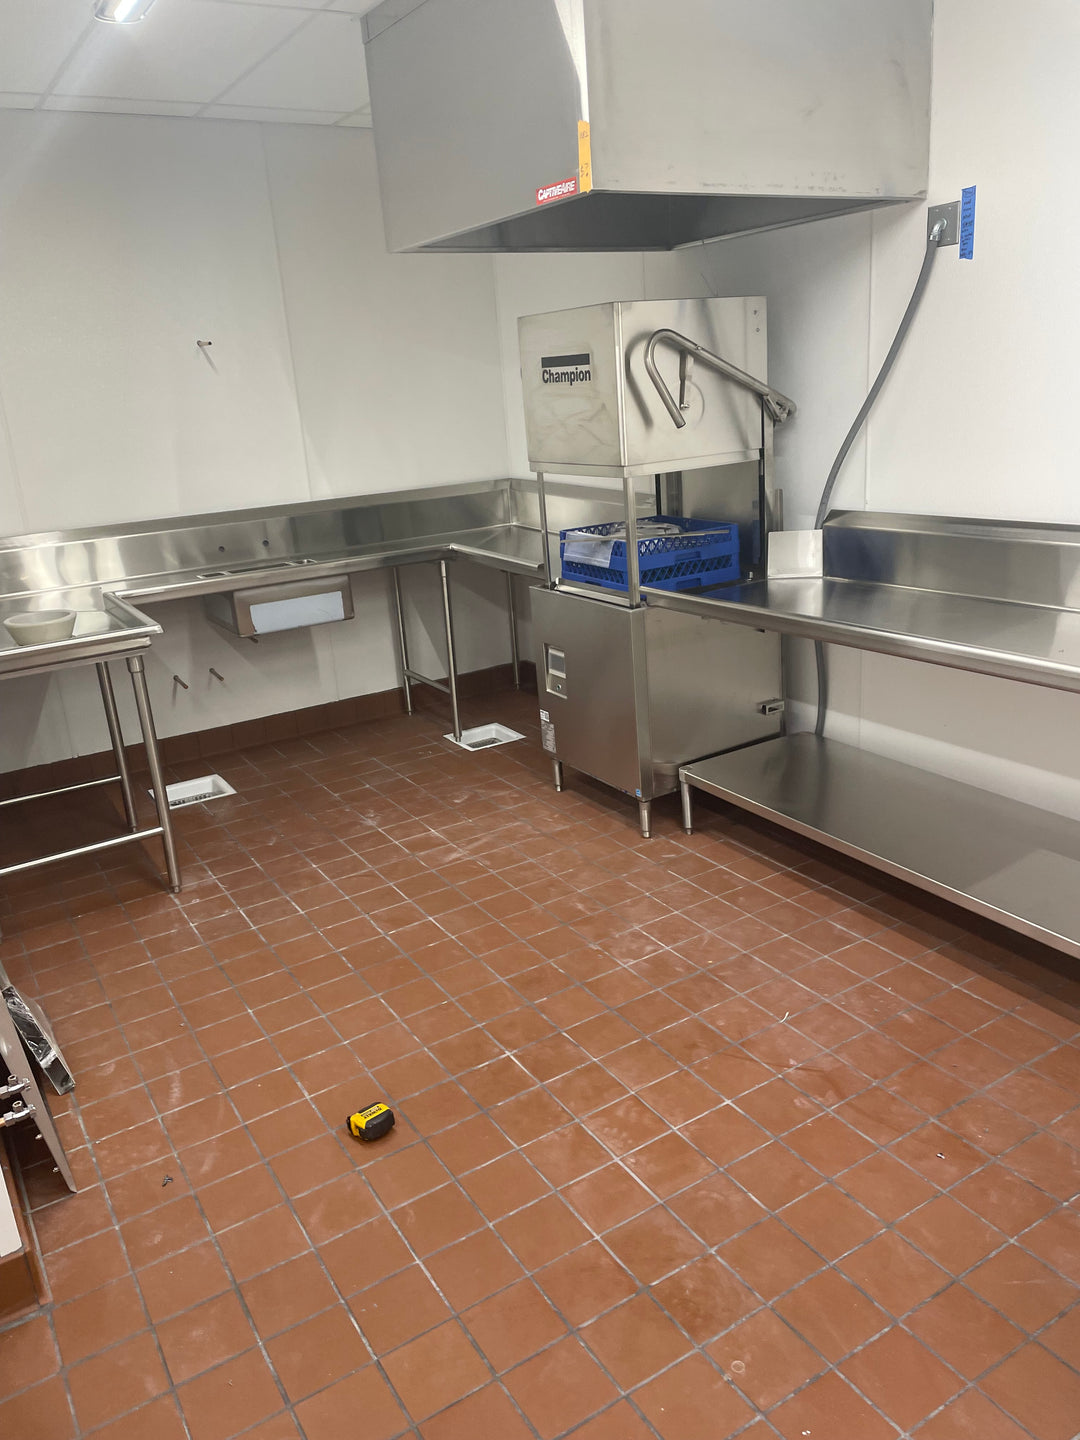 commercial dishwashing equipment, hood and sinks set up for customer's preferred work flow.